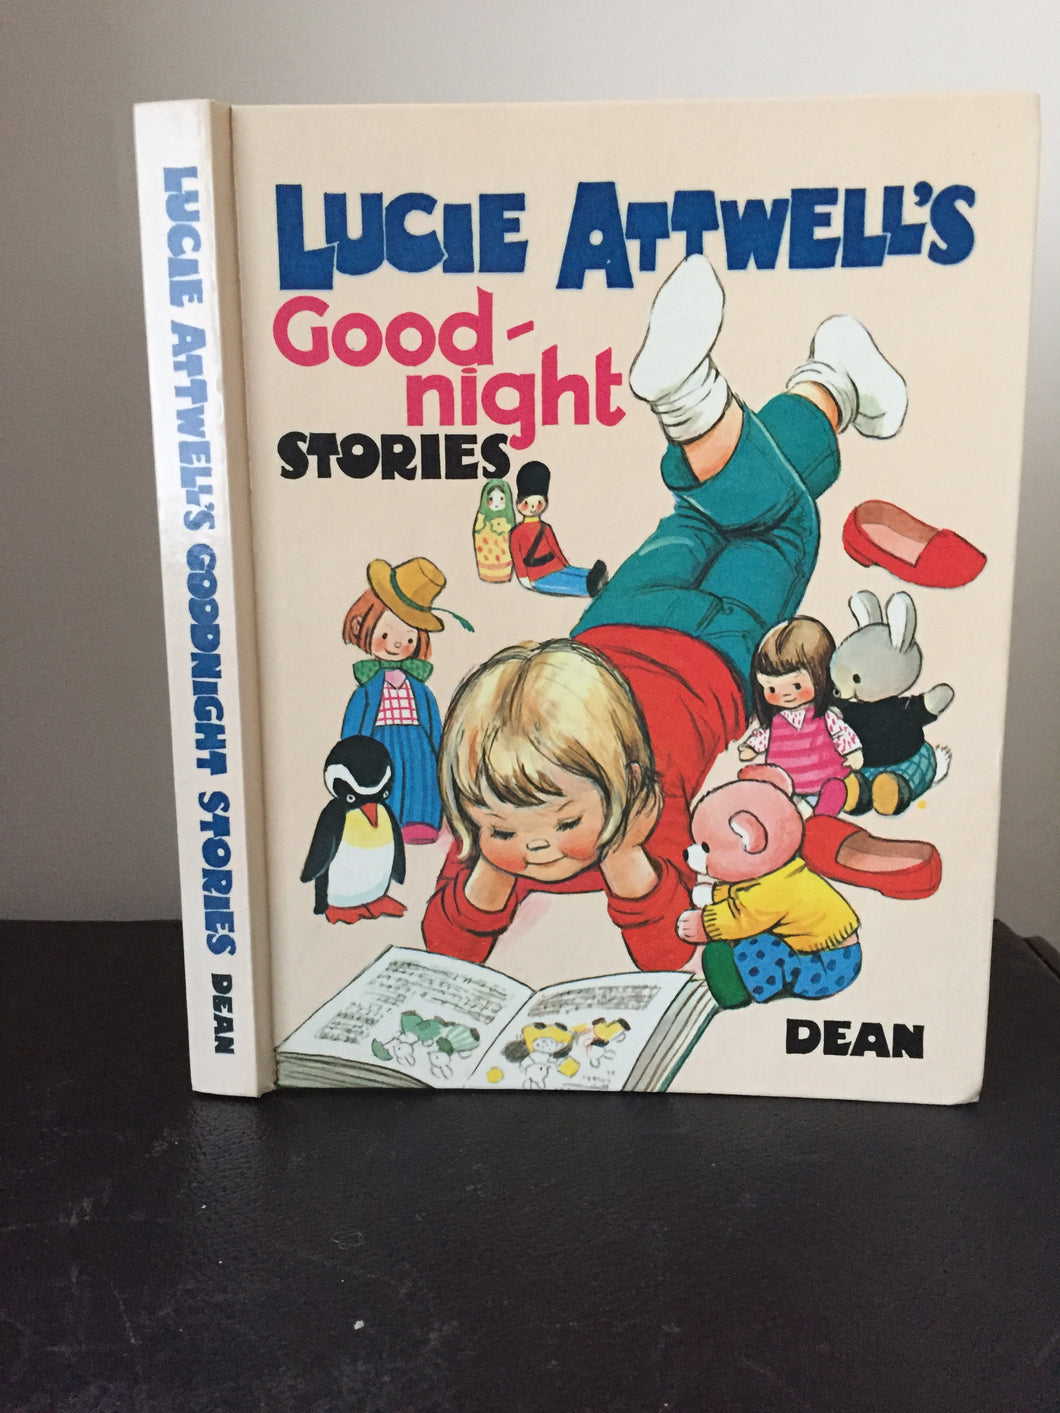 Lucie Attwell's Good-night Stories